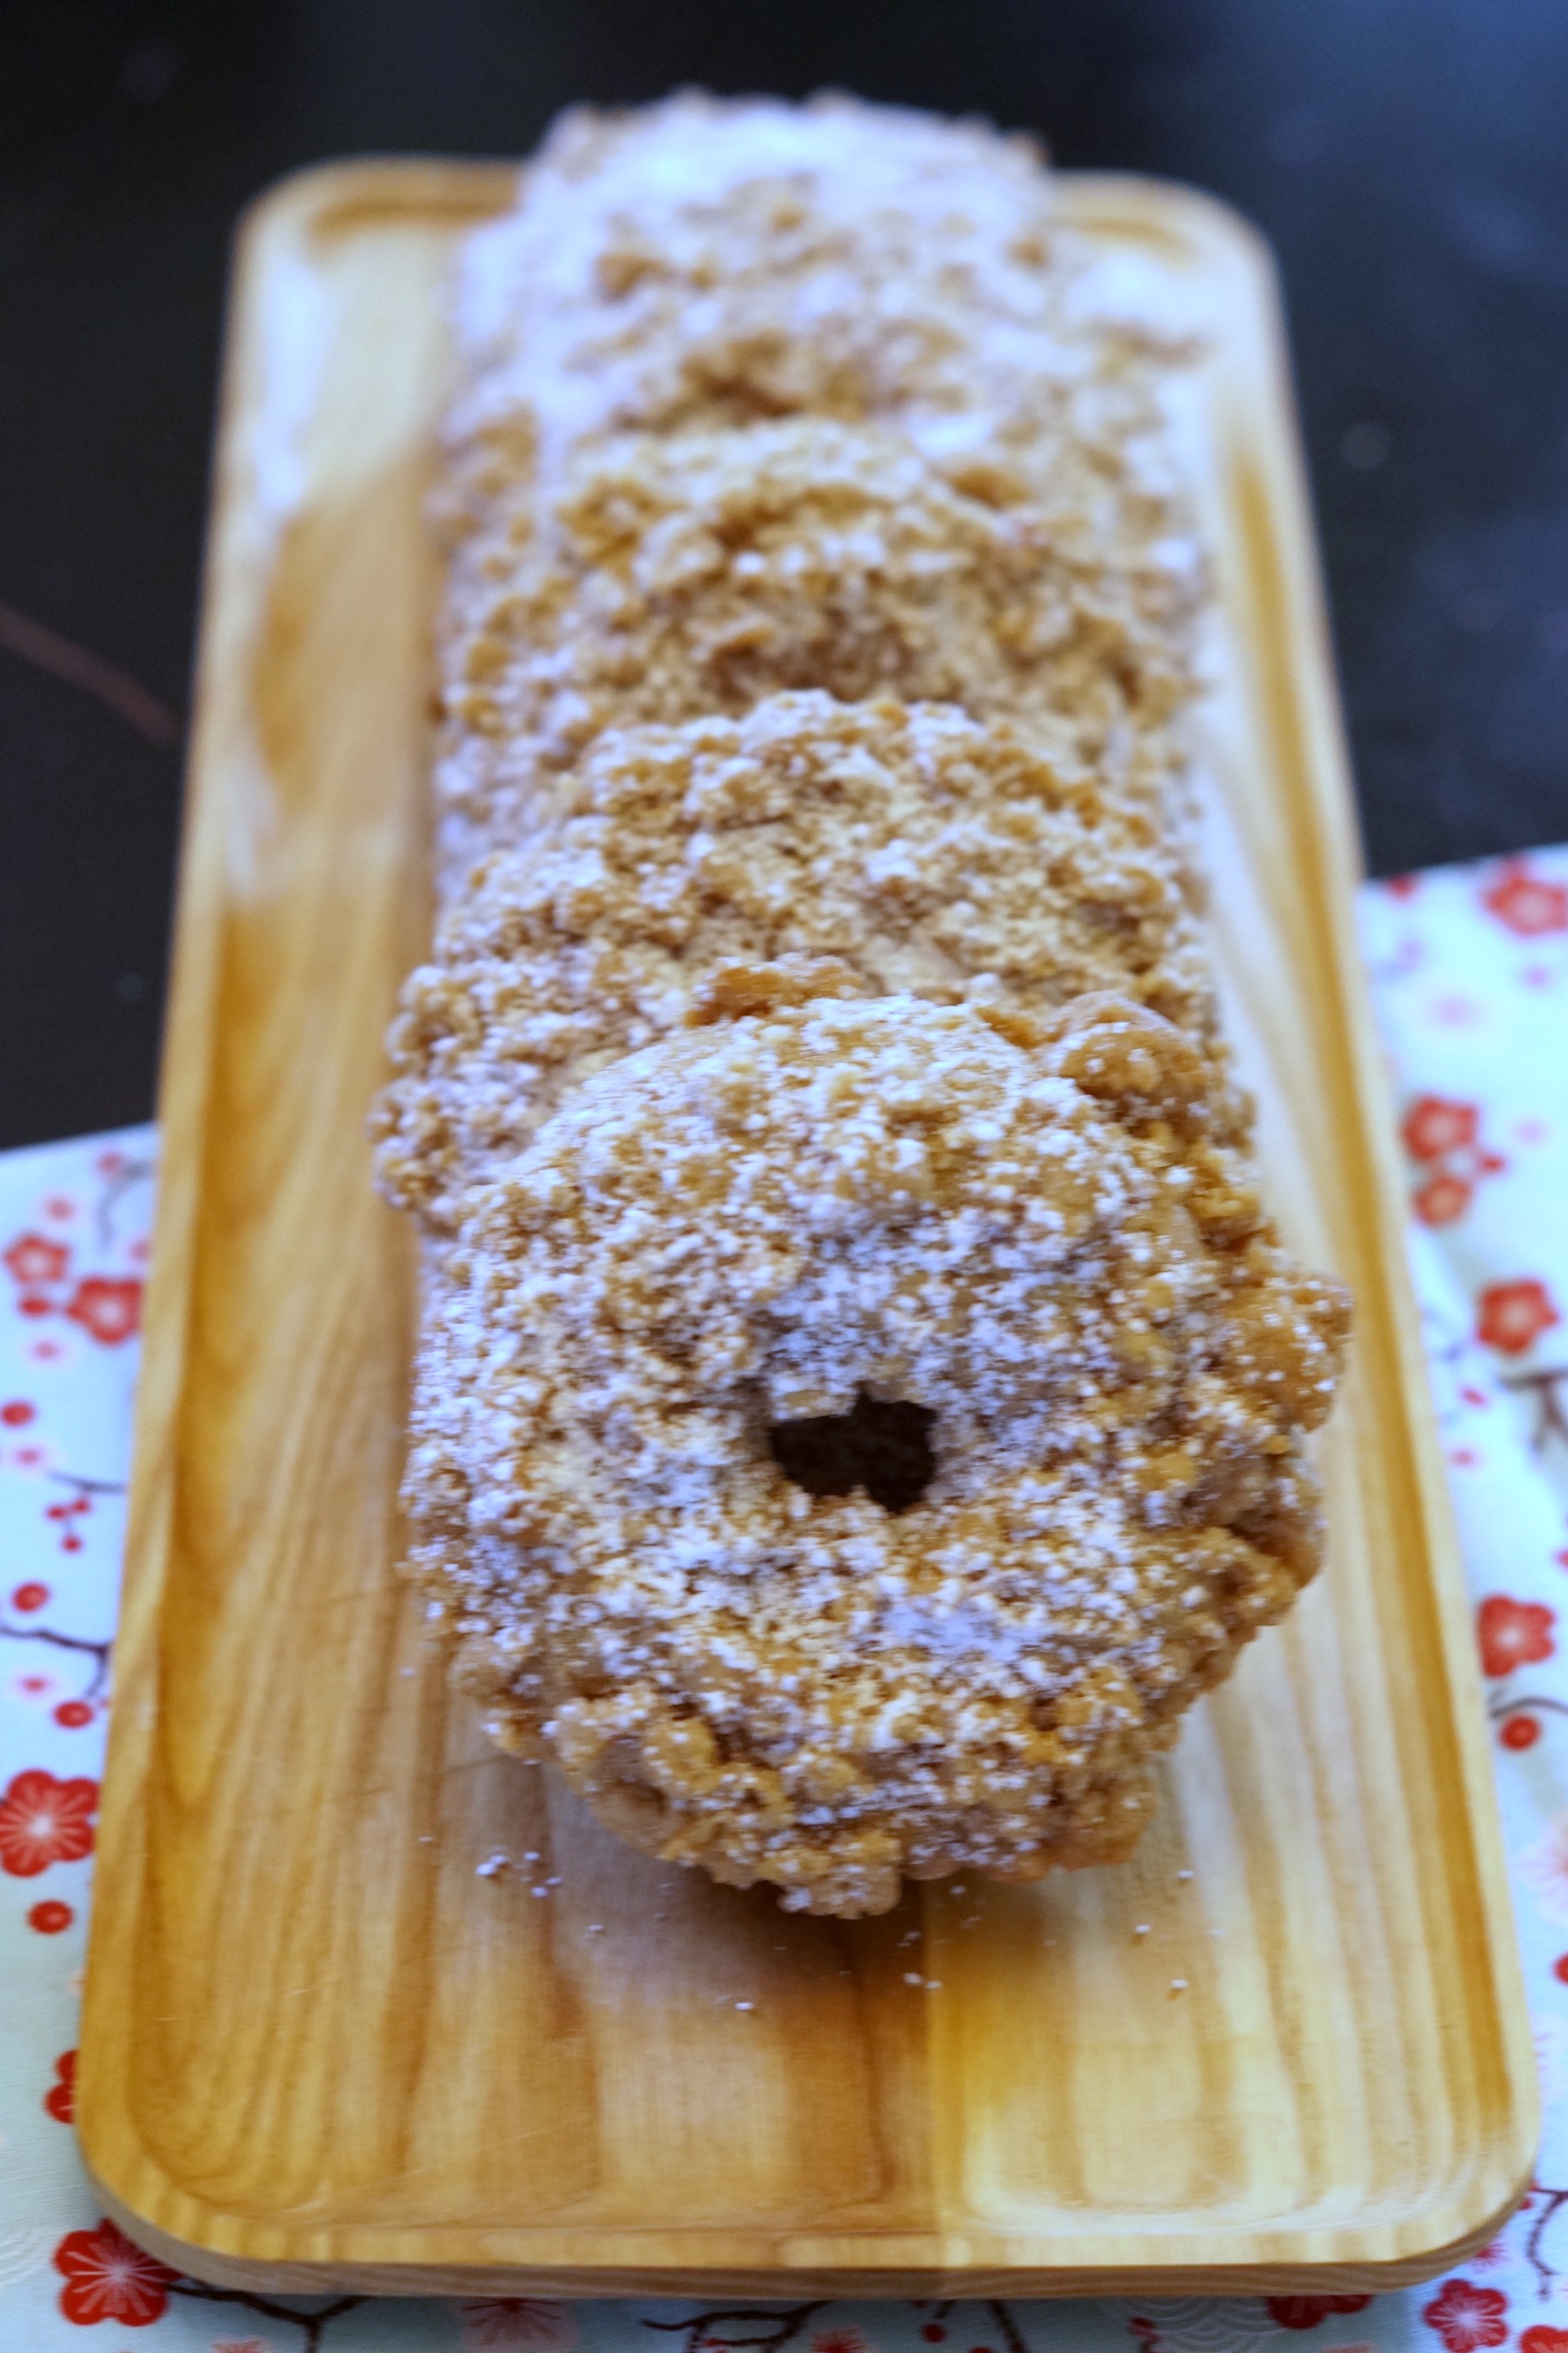 Looking for the perfect pairing for a hot cup of coffee? Look no further than this easy to make coffee cake donut recipe. Grab your oven mitt and get baking!